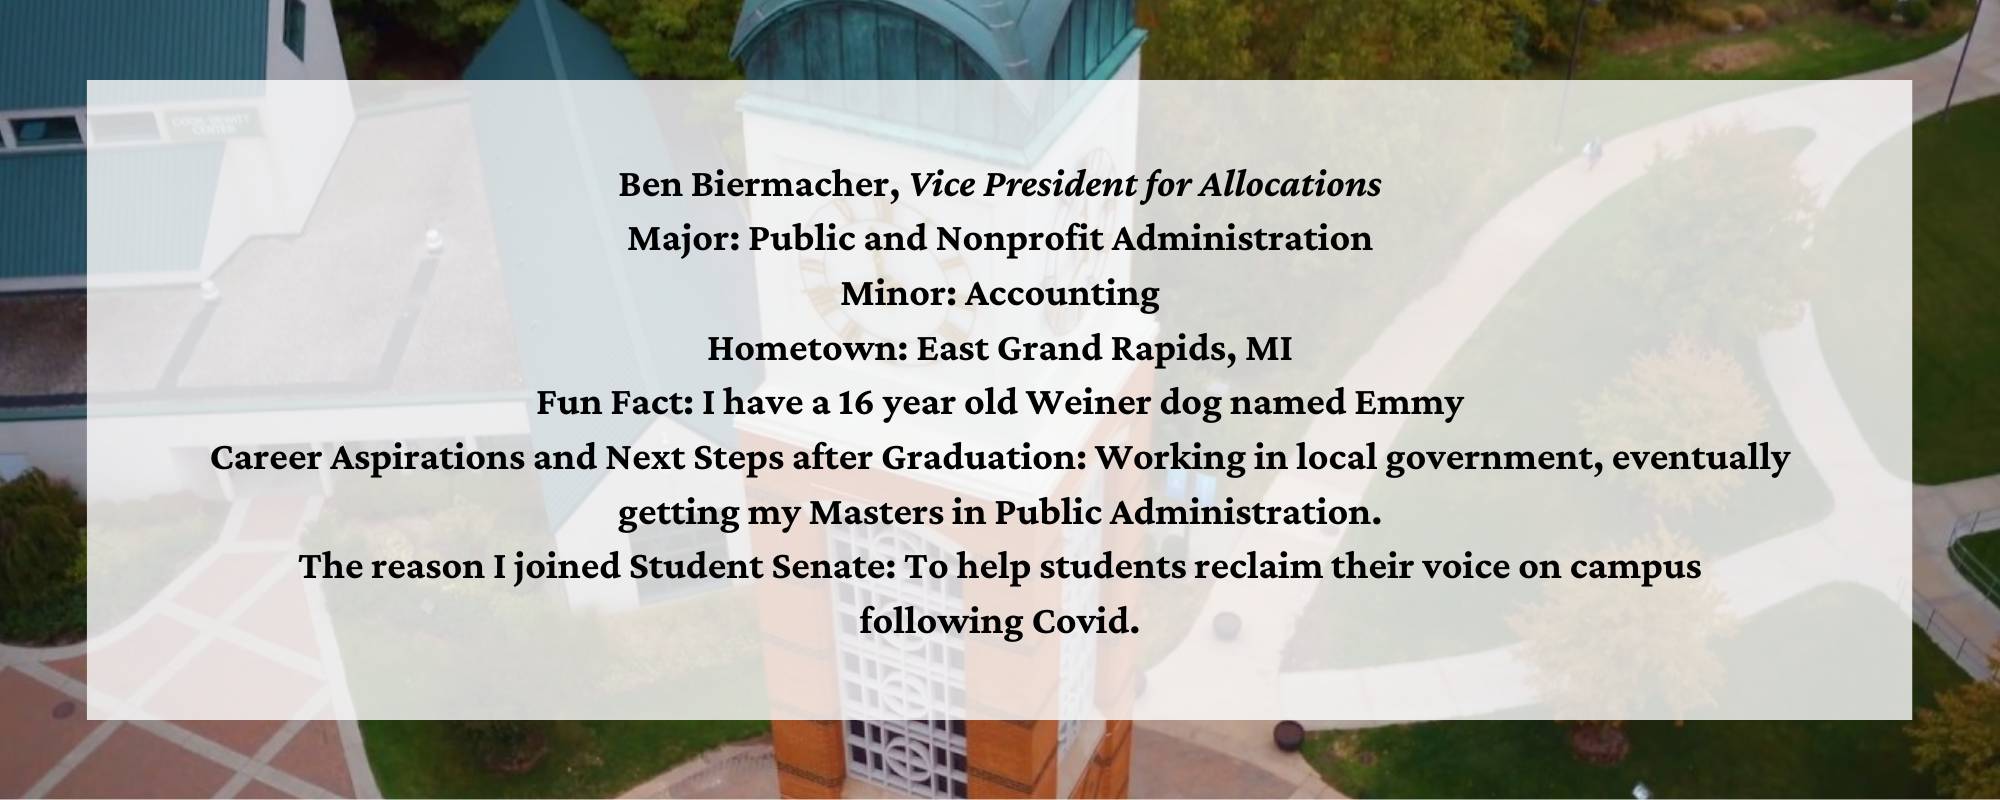 Ben Biermacher, Vice President for Allocations Major: Public and Nonprofit Administration Minor: Accounting Hometown: East Grand Rapids, MI Fun Fact: I have a 16 year old Weiner dog named Emmy Career Aspirations and Next Steps after Graduation: Working in local government, eventually getting my Masters in Public Administration. The reason I joined Student Senate: To help students reclaim their voice on campus following Covid